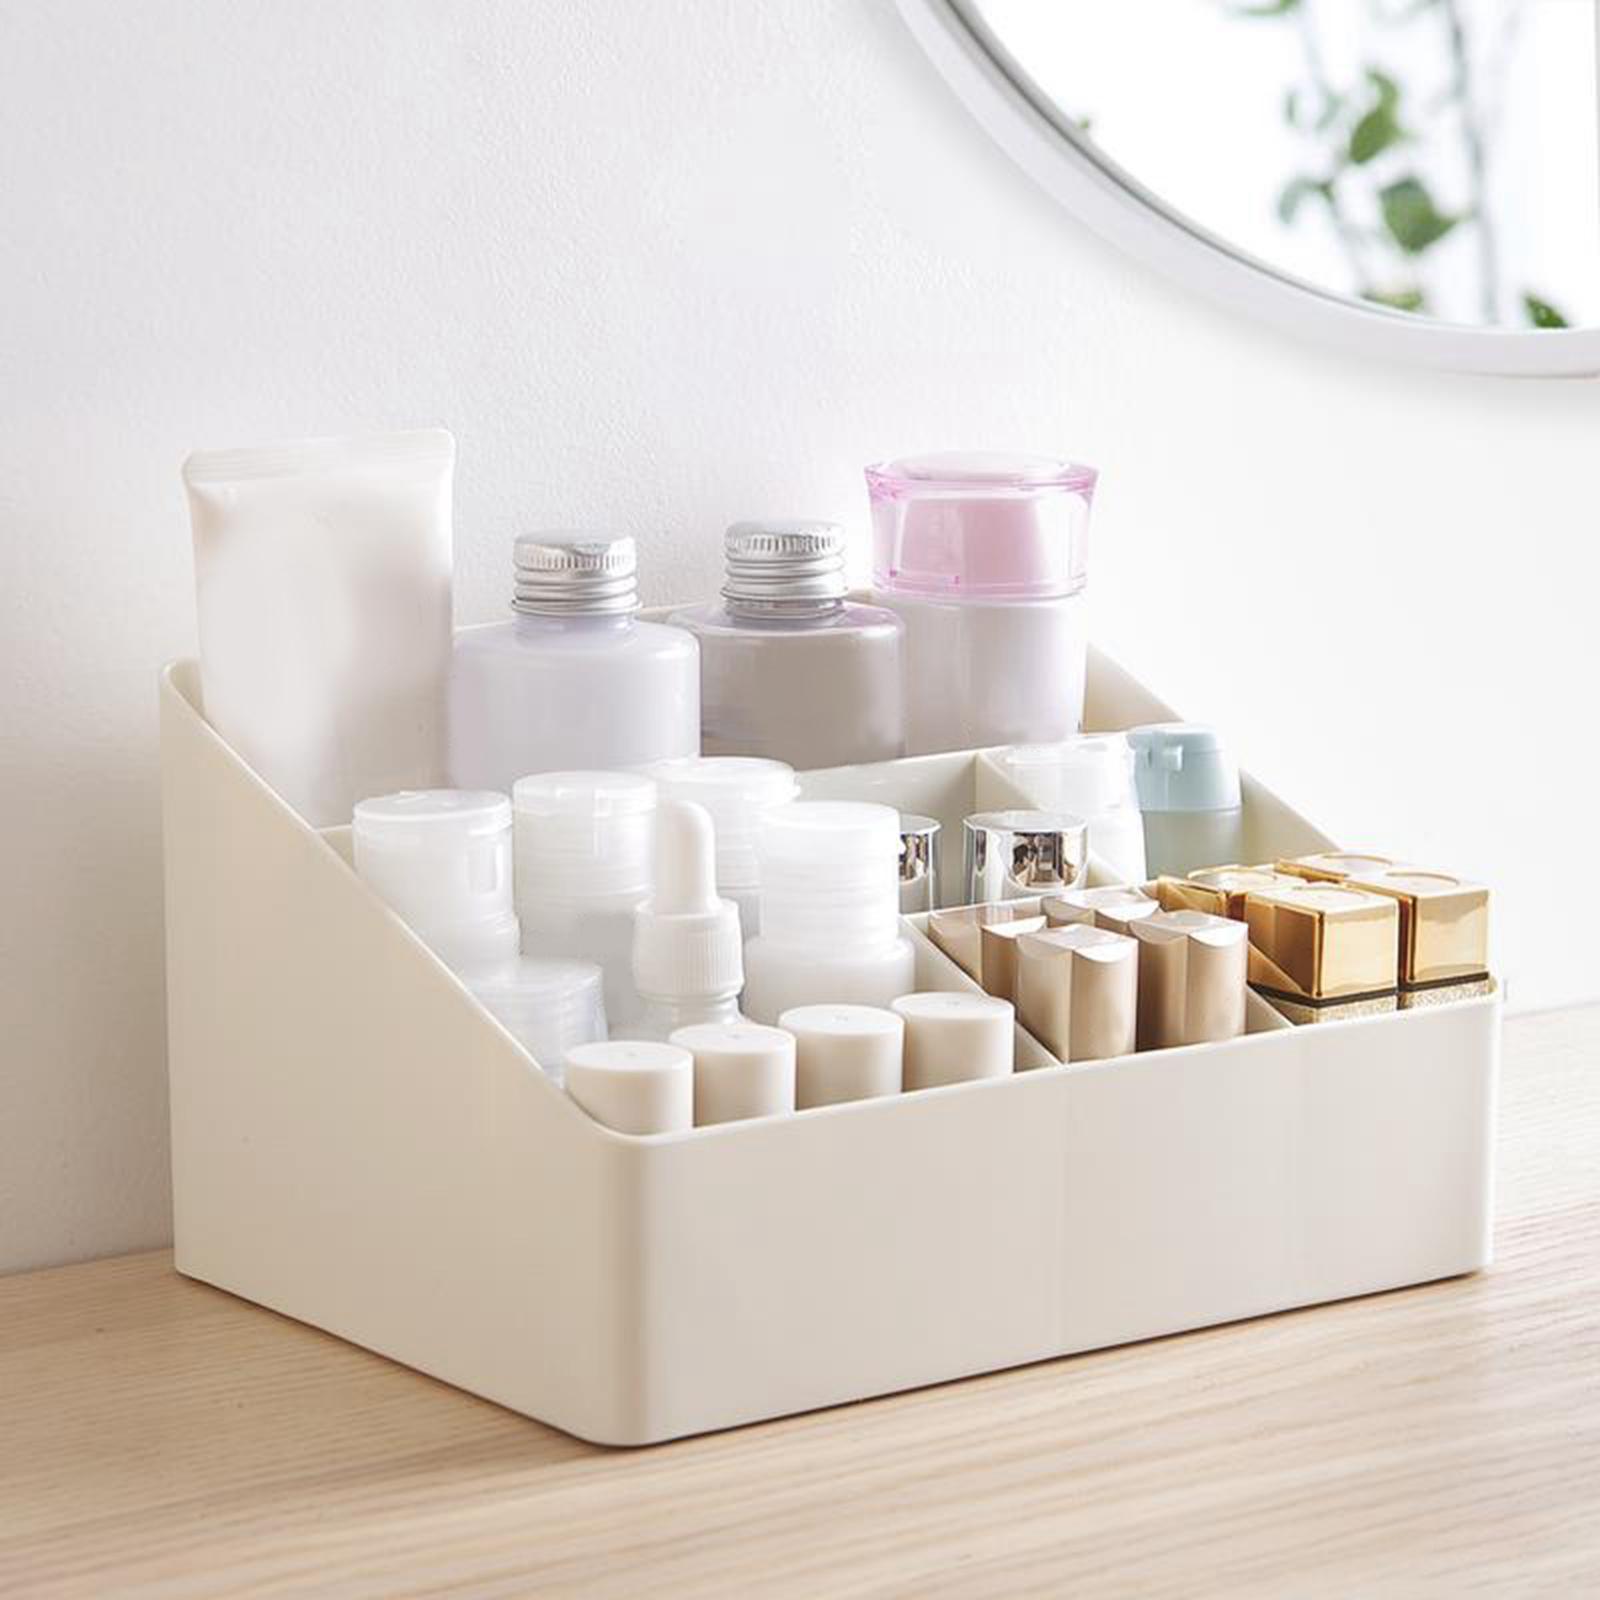 Cosmetic Storage Box Ladder Design Makeup Desk Organizer for Home Brushes White